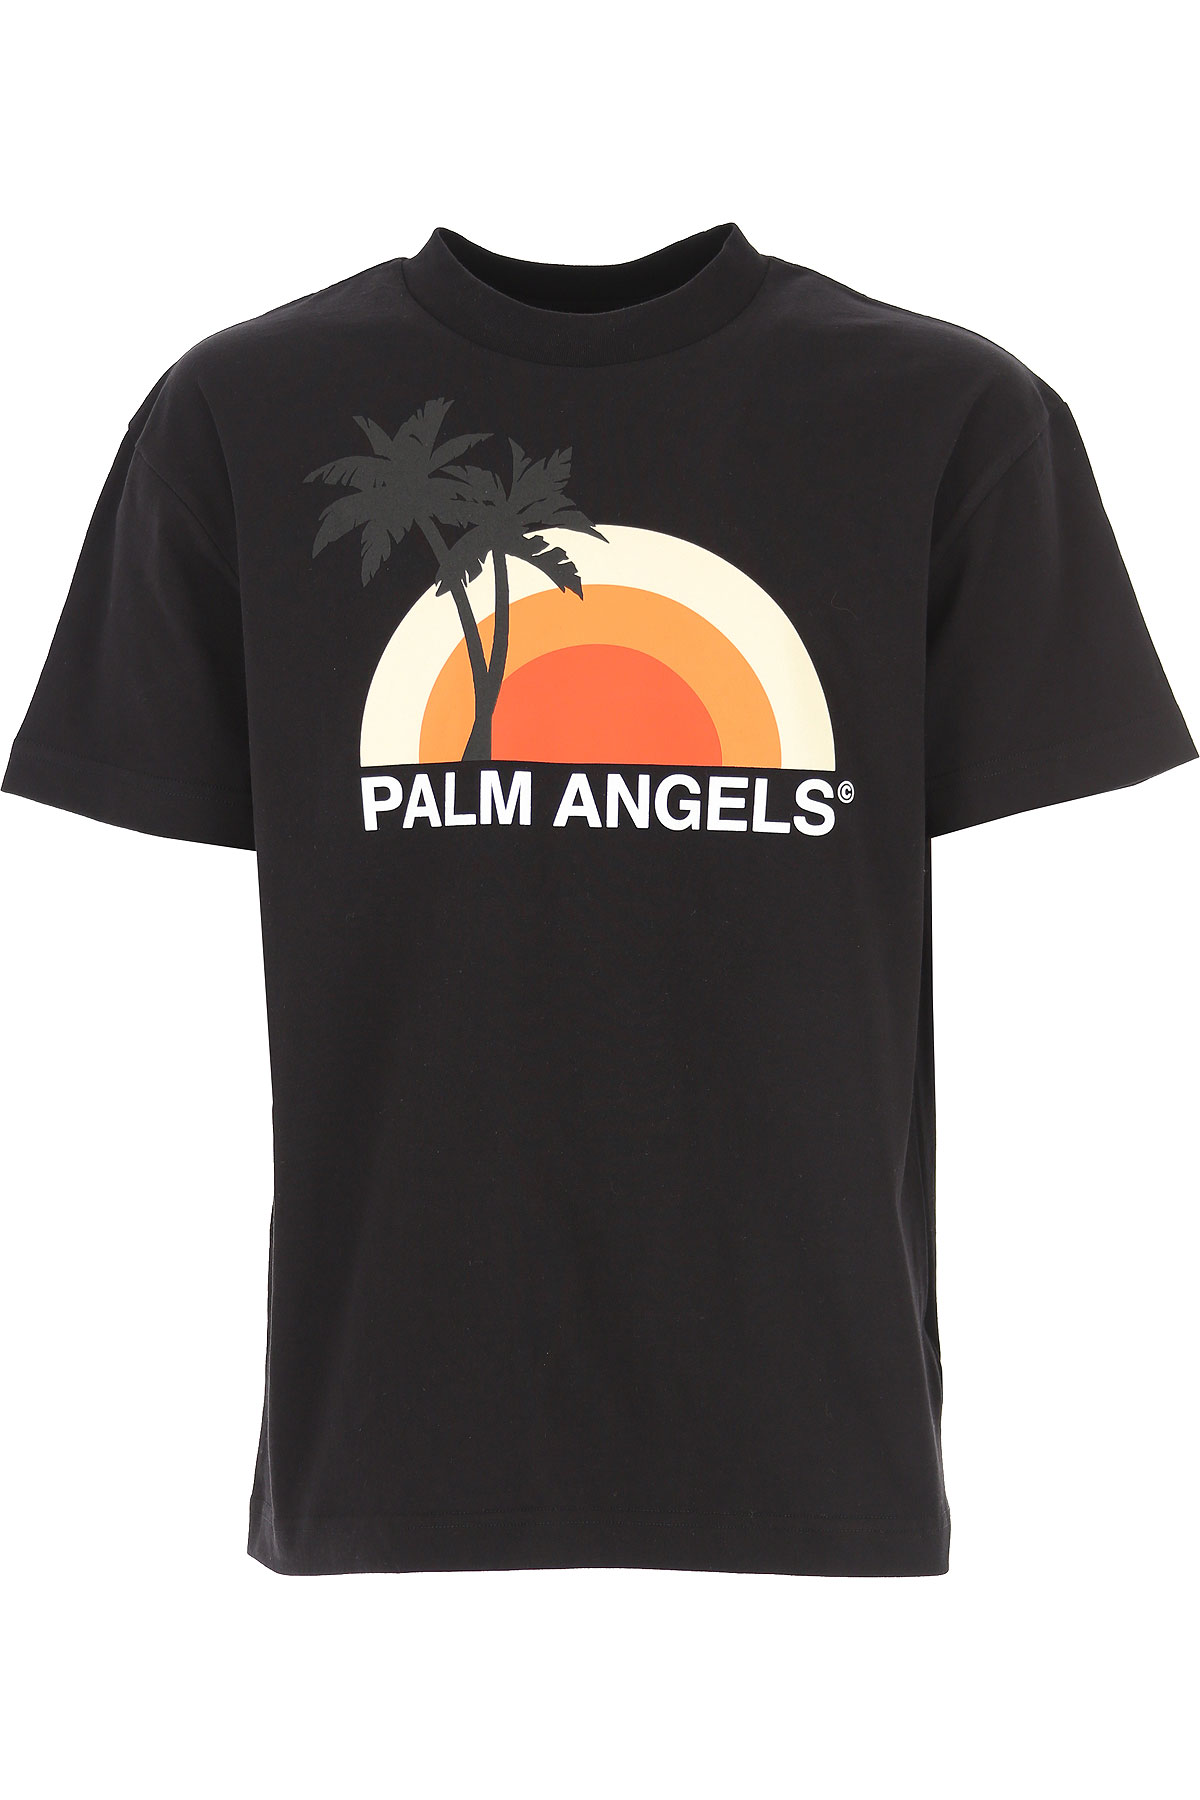 Mens Clothing Palm Angels, Style code: pmaa001s204130161088-black-